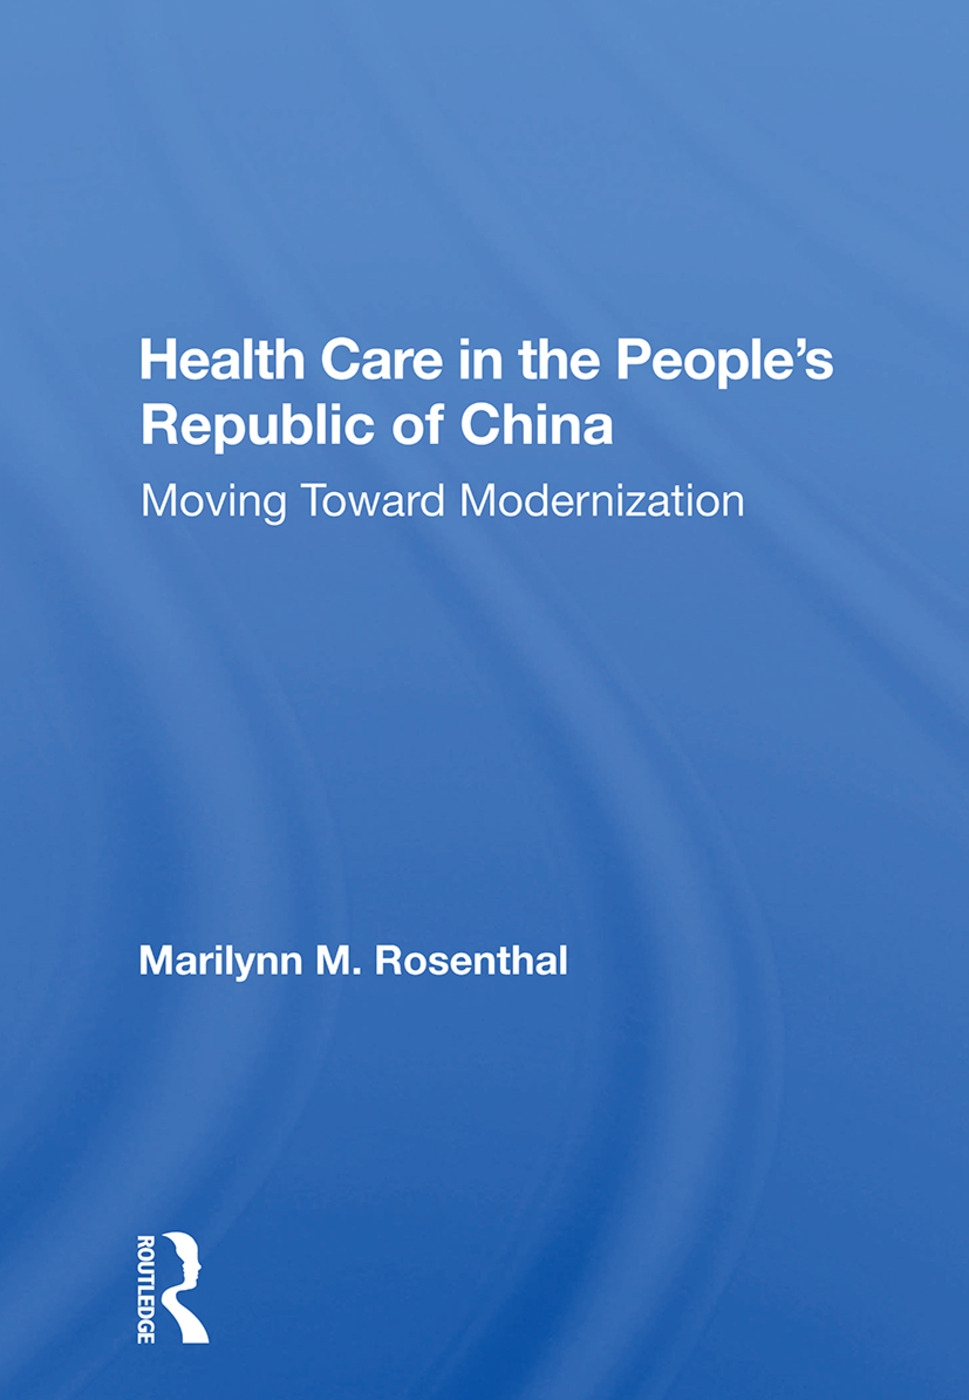 Health Care in the People’s Republic of China: Moving Toward Modernization